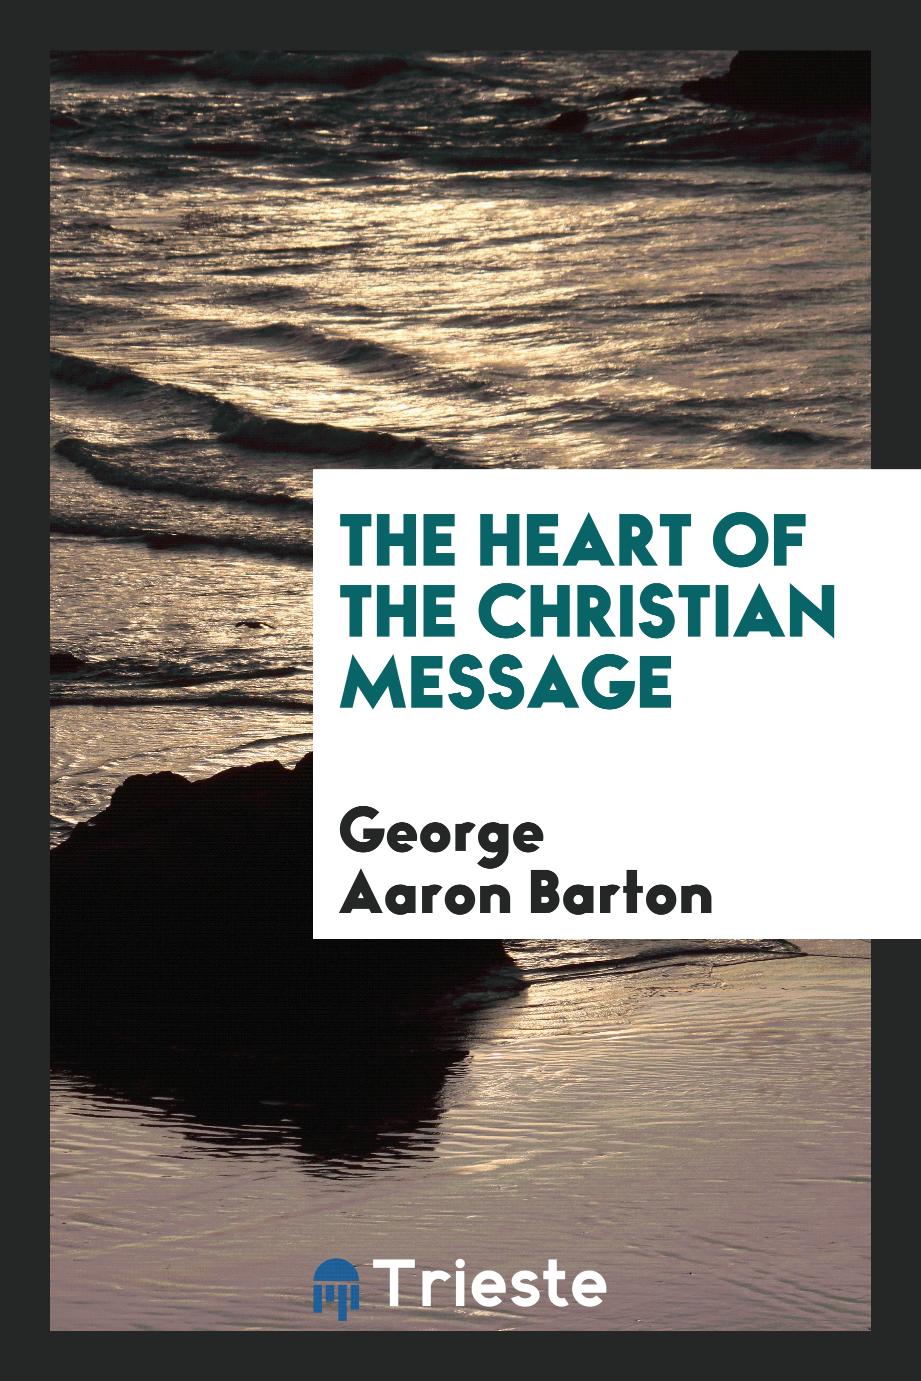 The heart of the Christian message